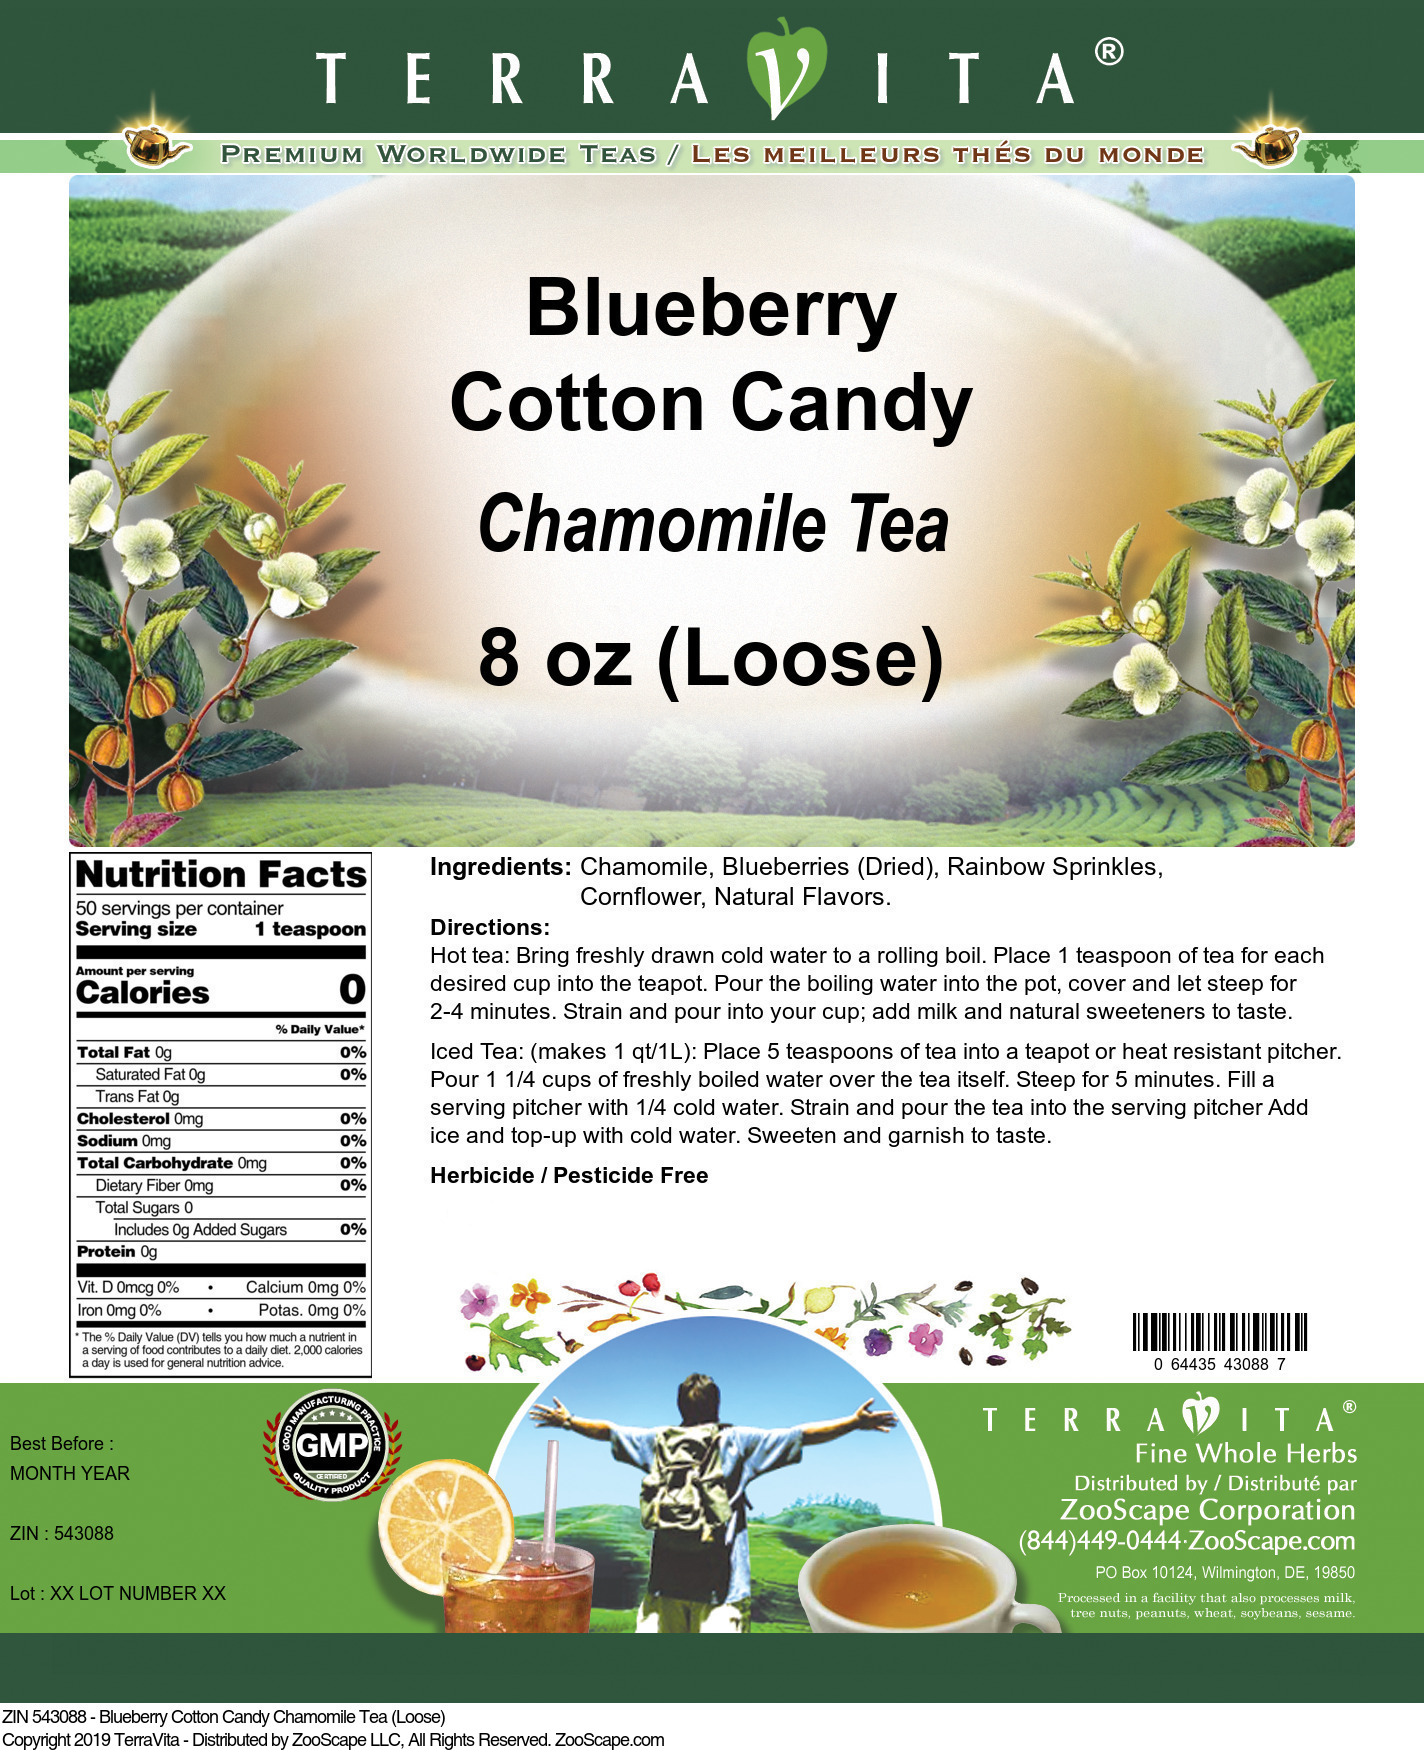 Blueberry Cotton Candy Chamomile Tea (Loose) - Label